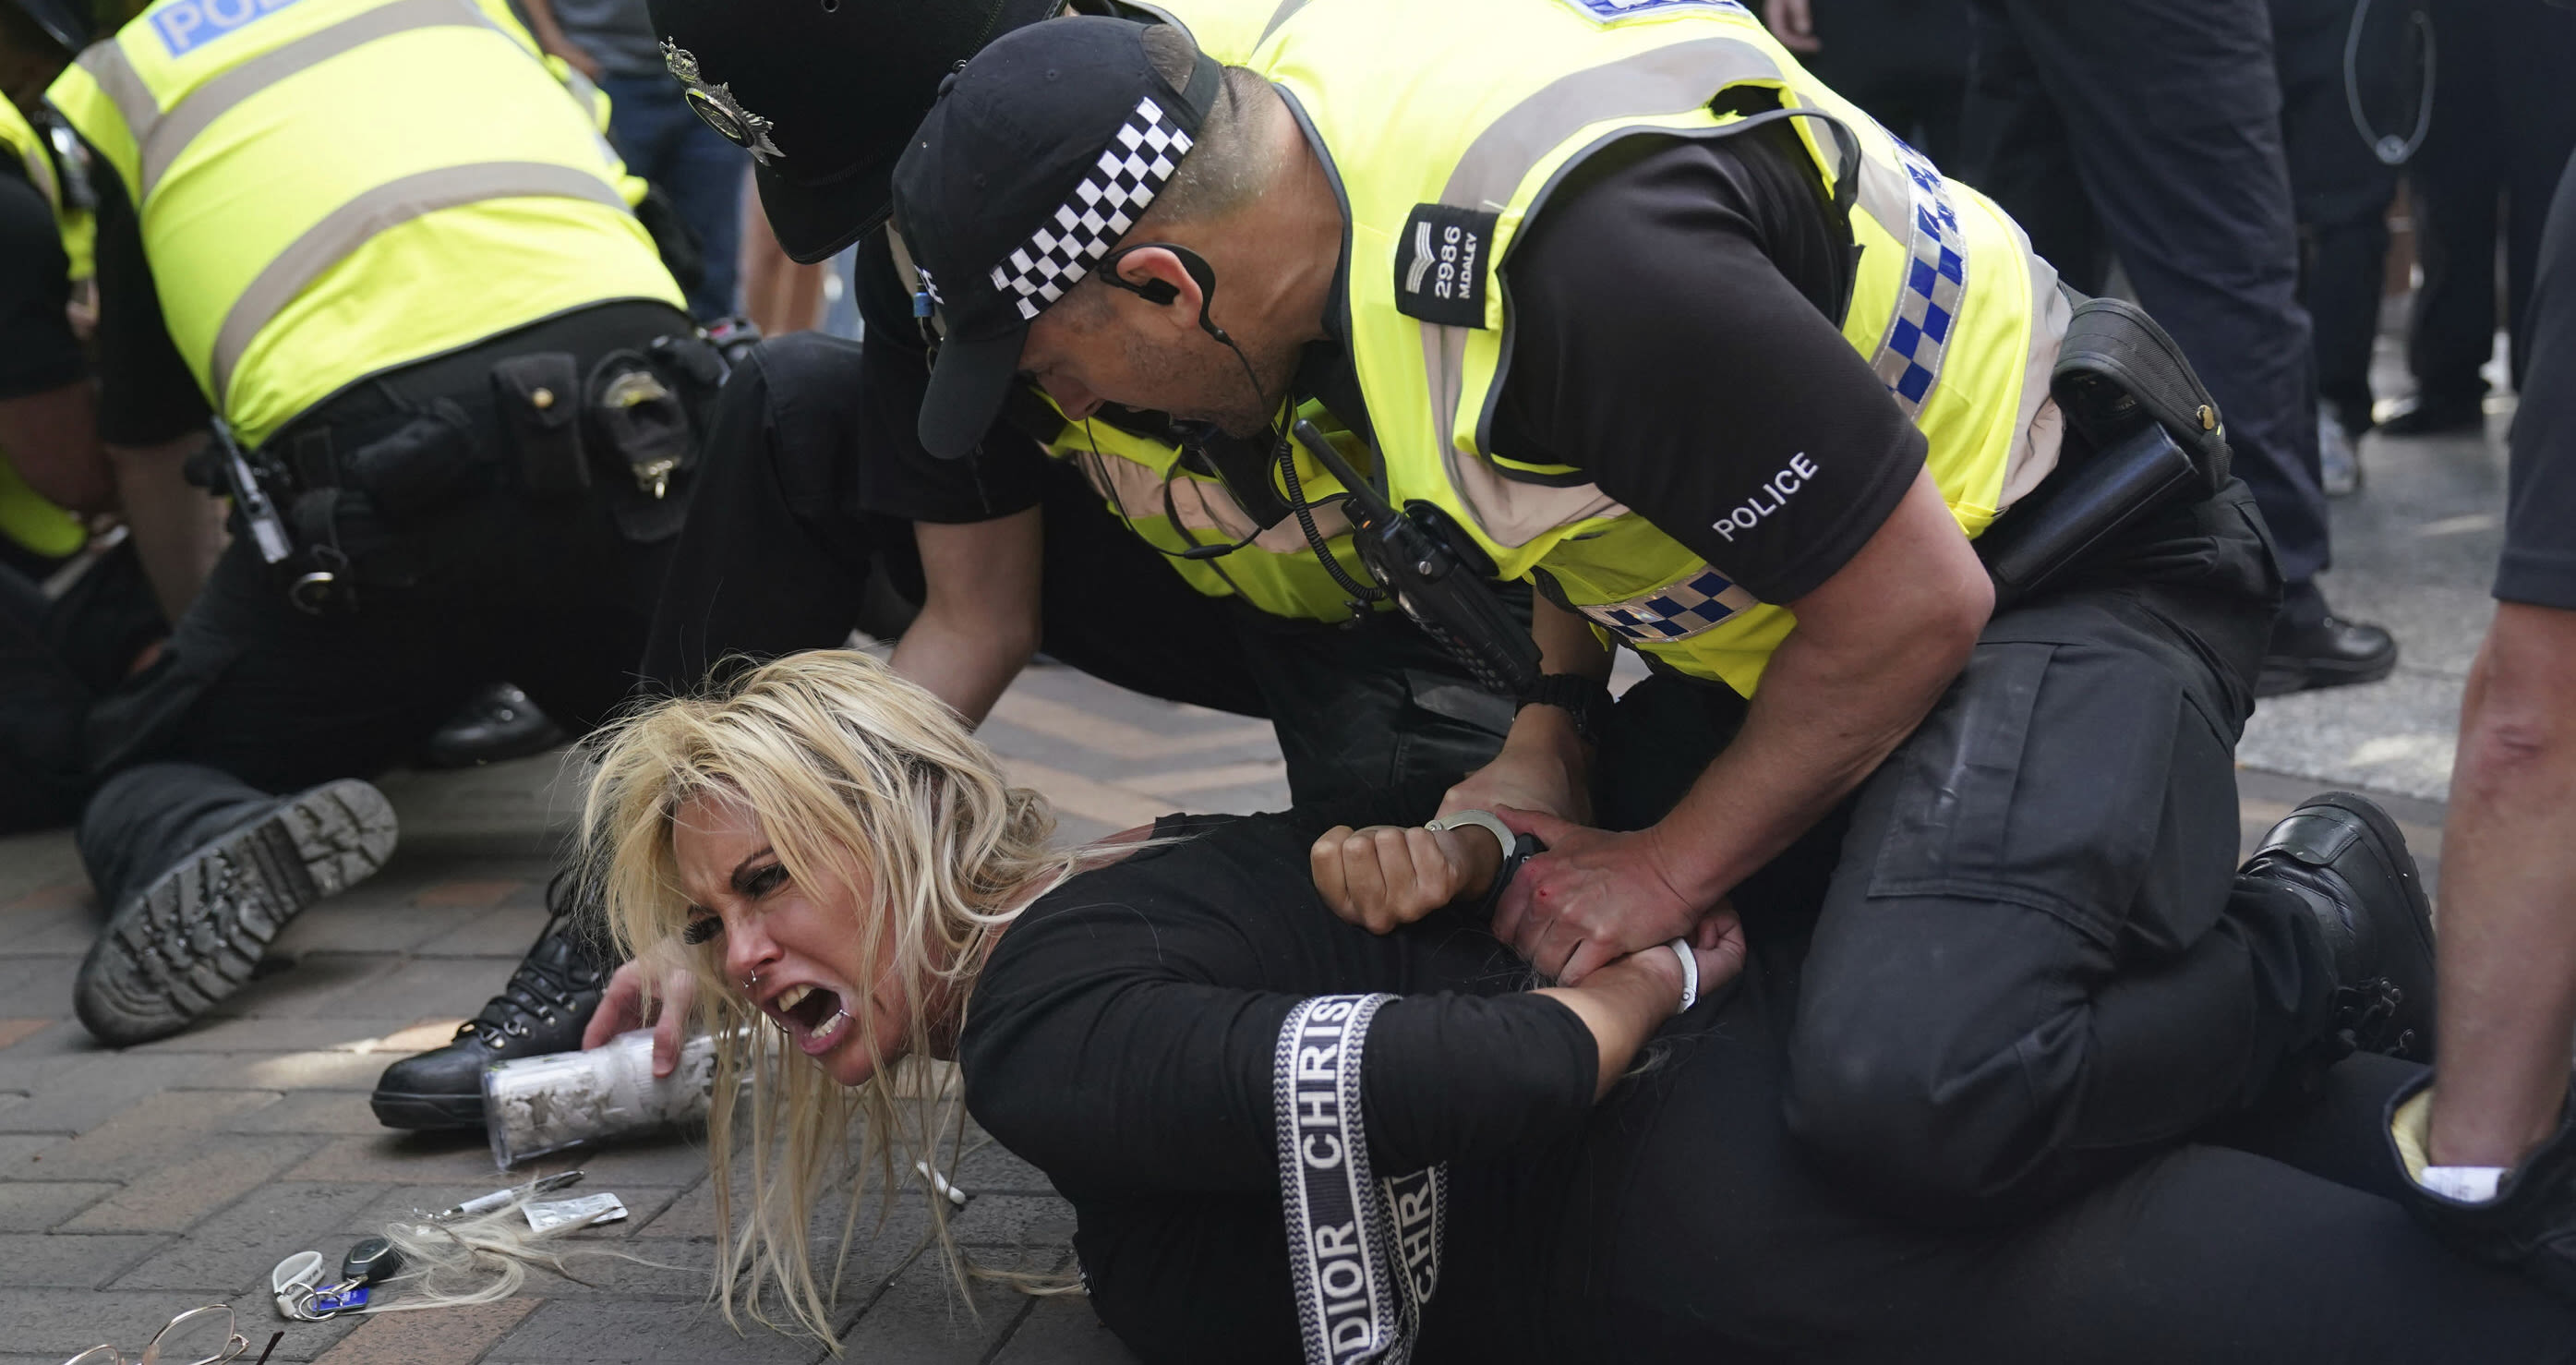 Photos: Violence flares in U.K. following stabbing deaths of children